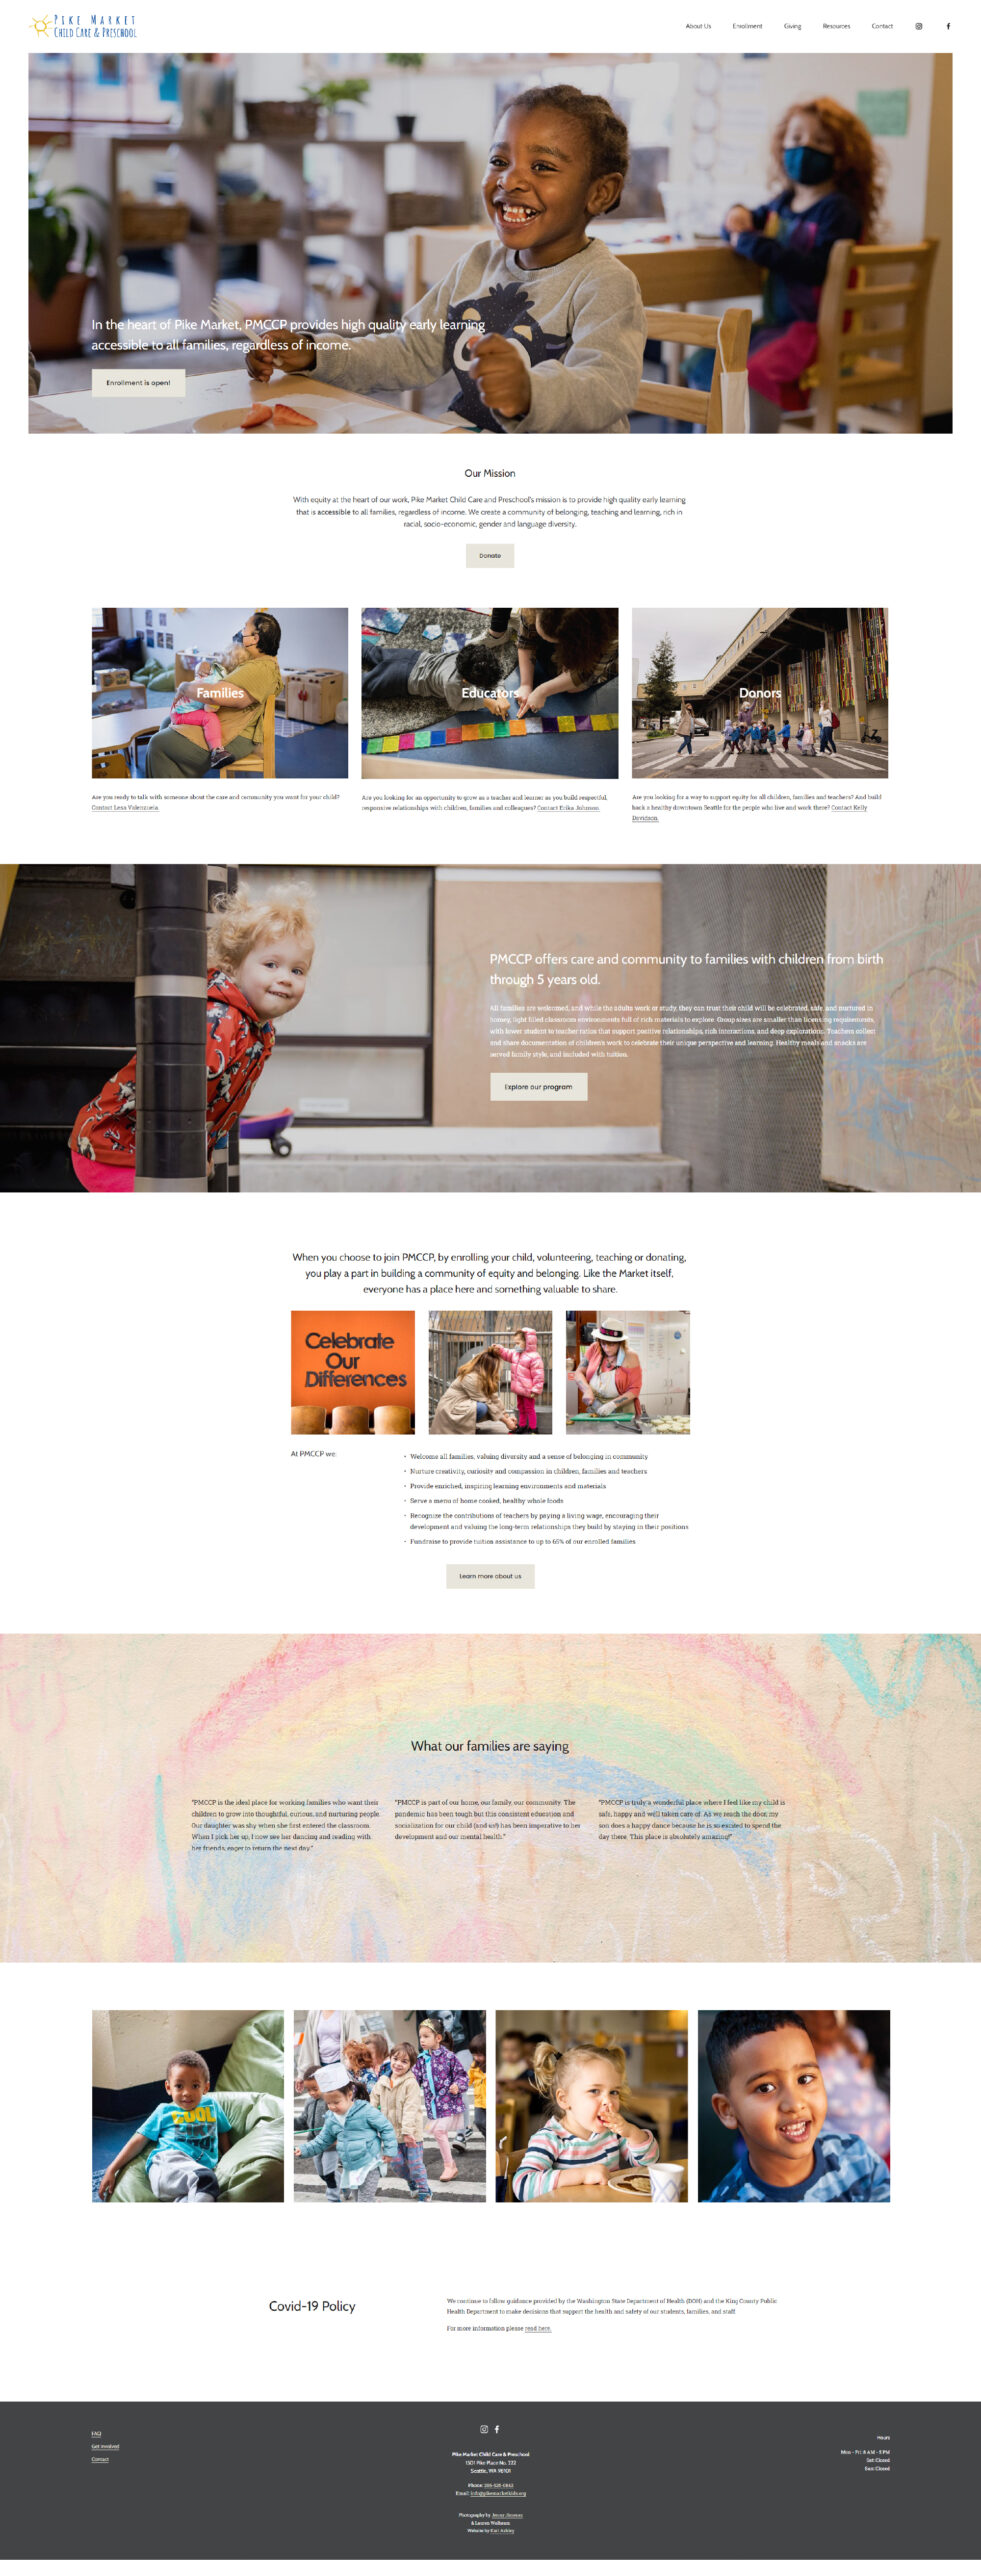 Capture of Pike Market Child Care and Preschool's website homepage